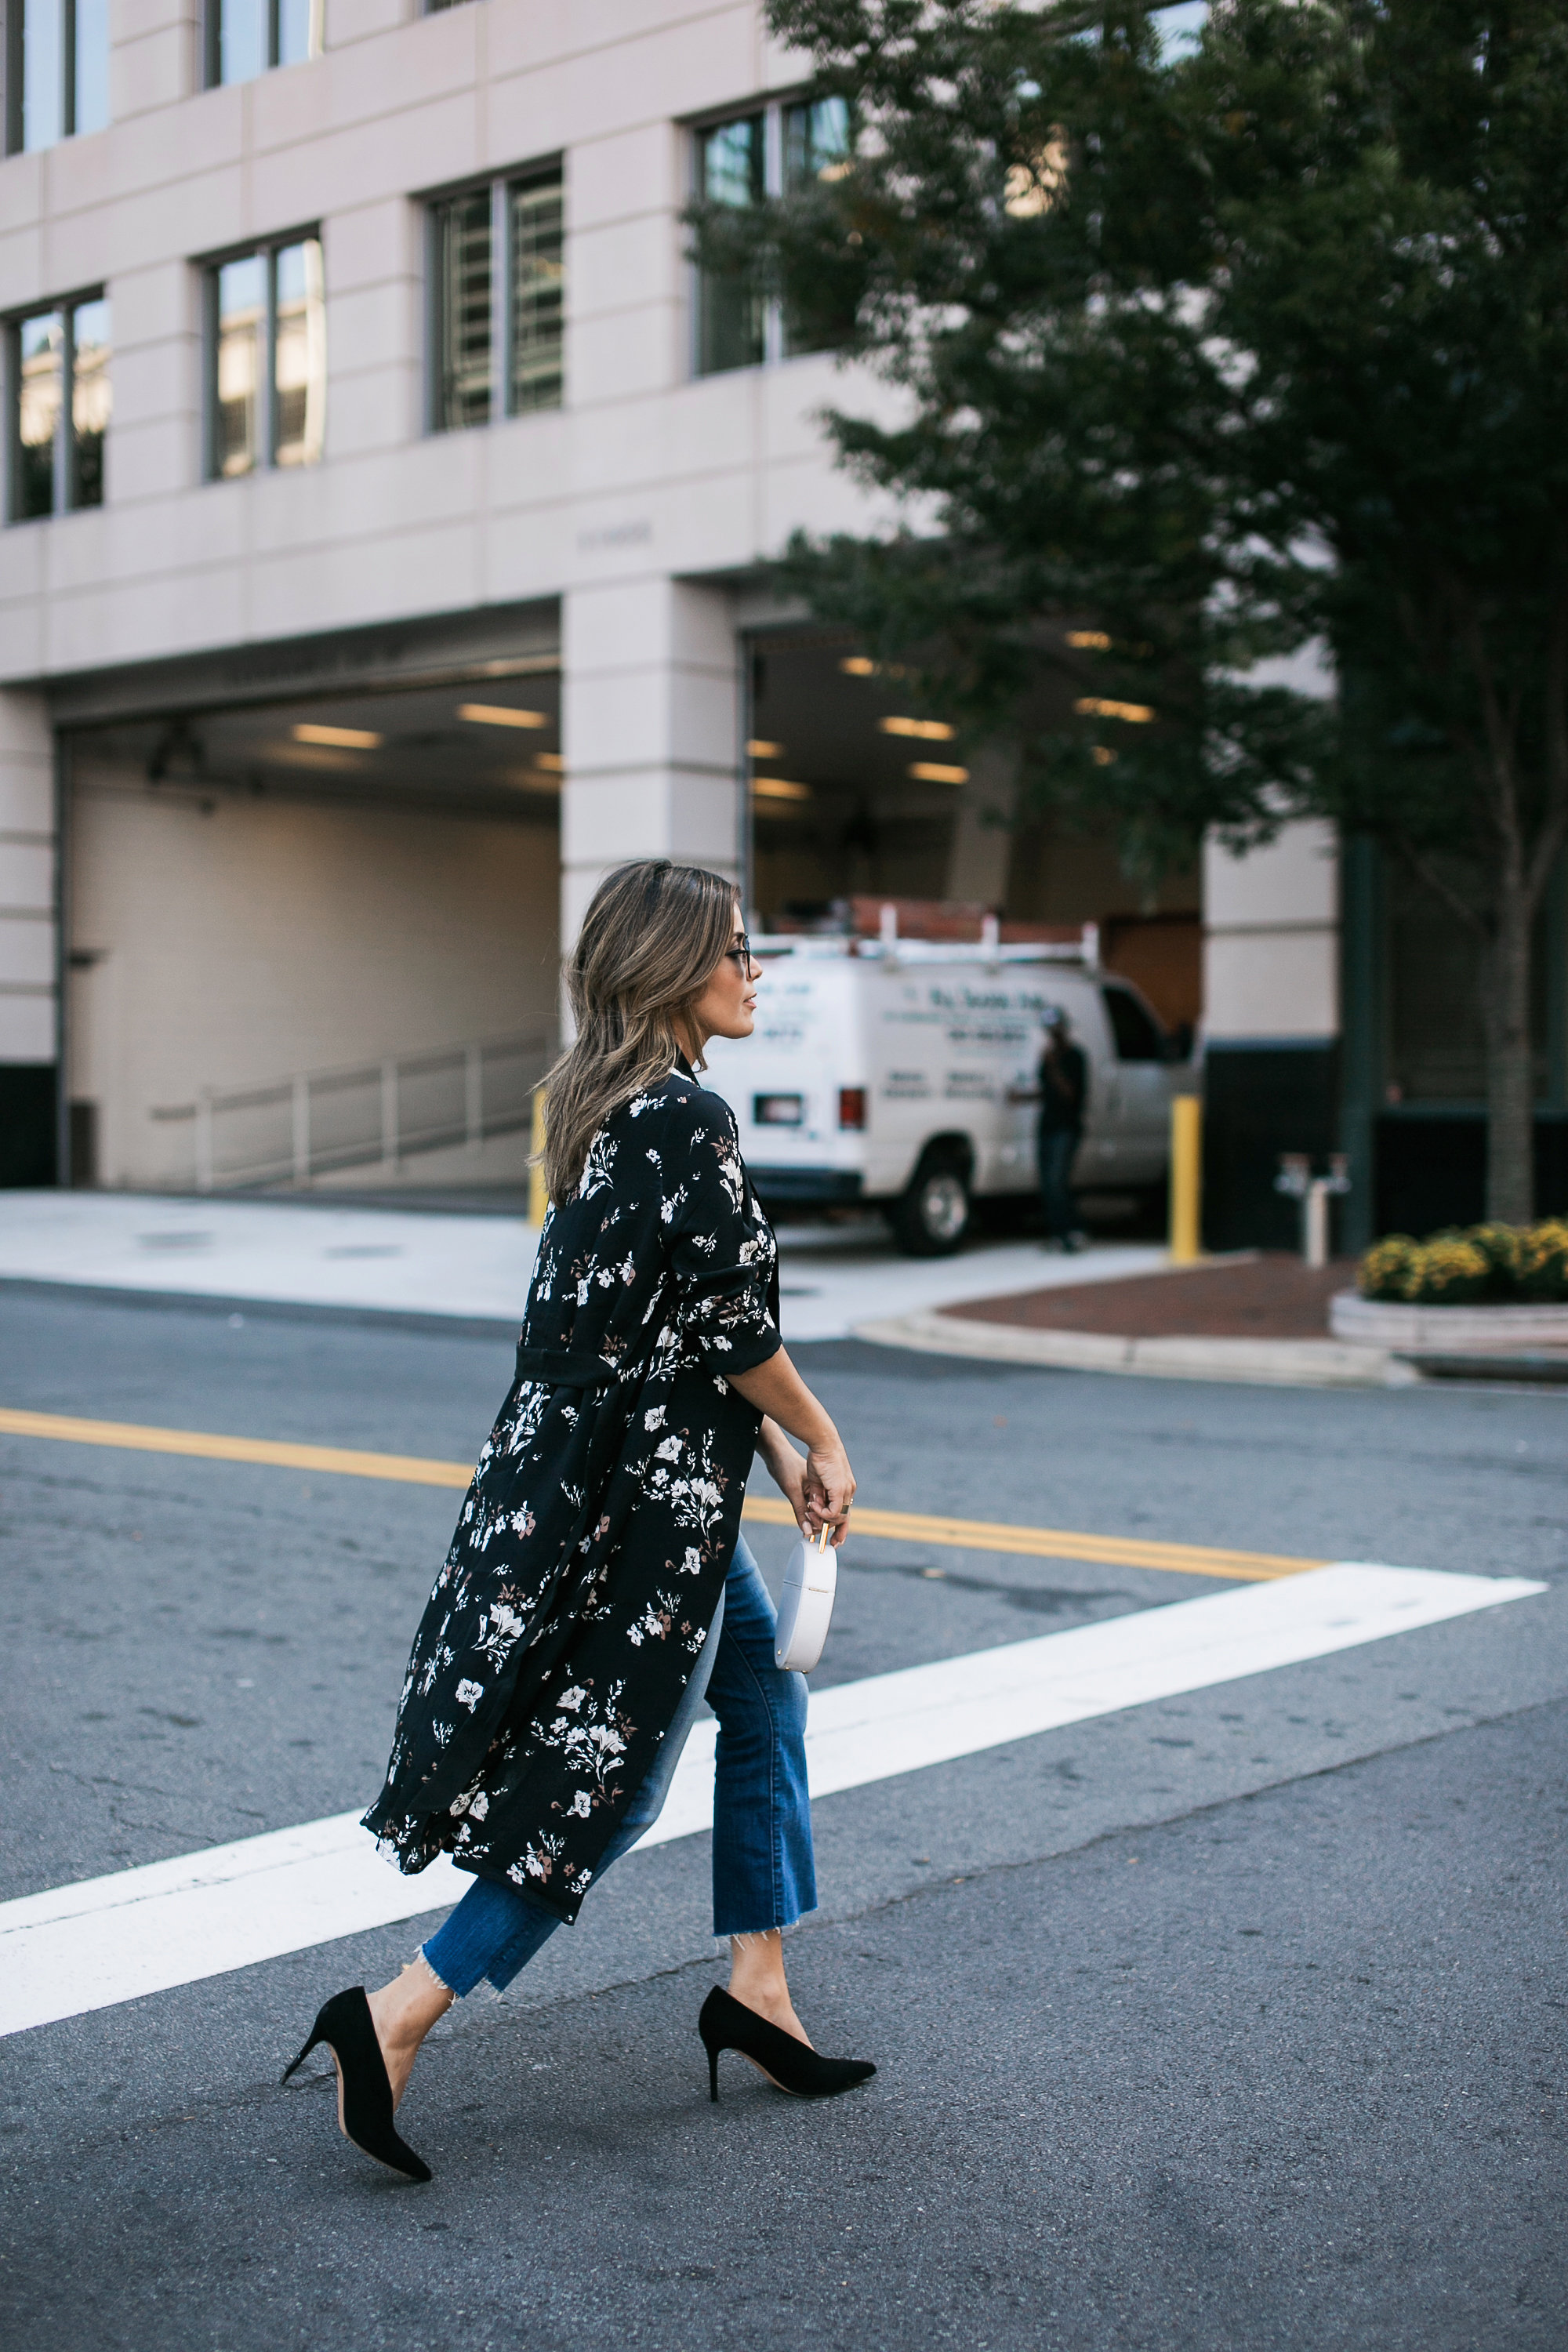 Style MBA Wears L'Academie x Revolve Floral Robe